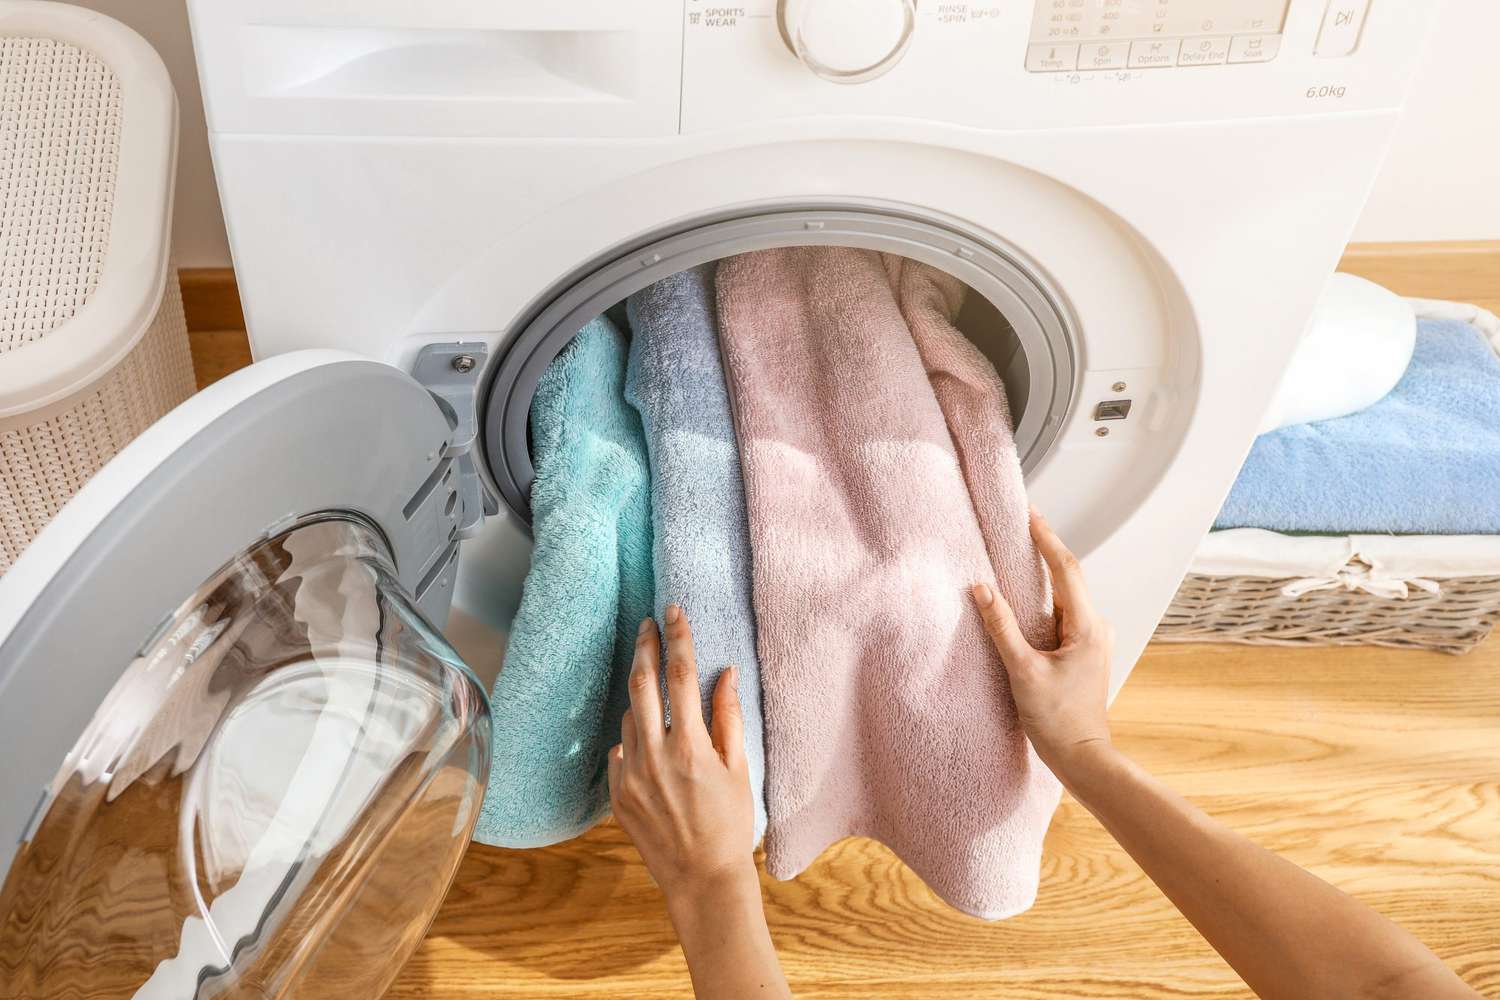 How To Wash Towels In The Washing Machine